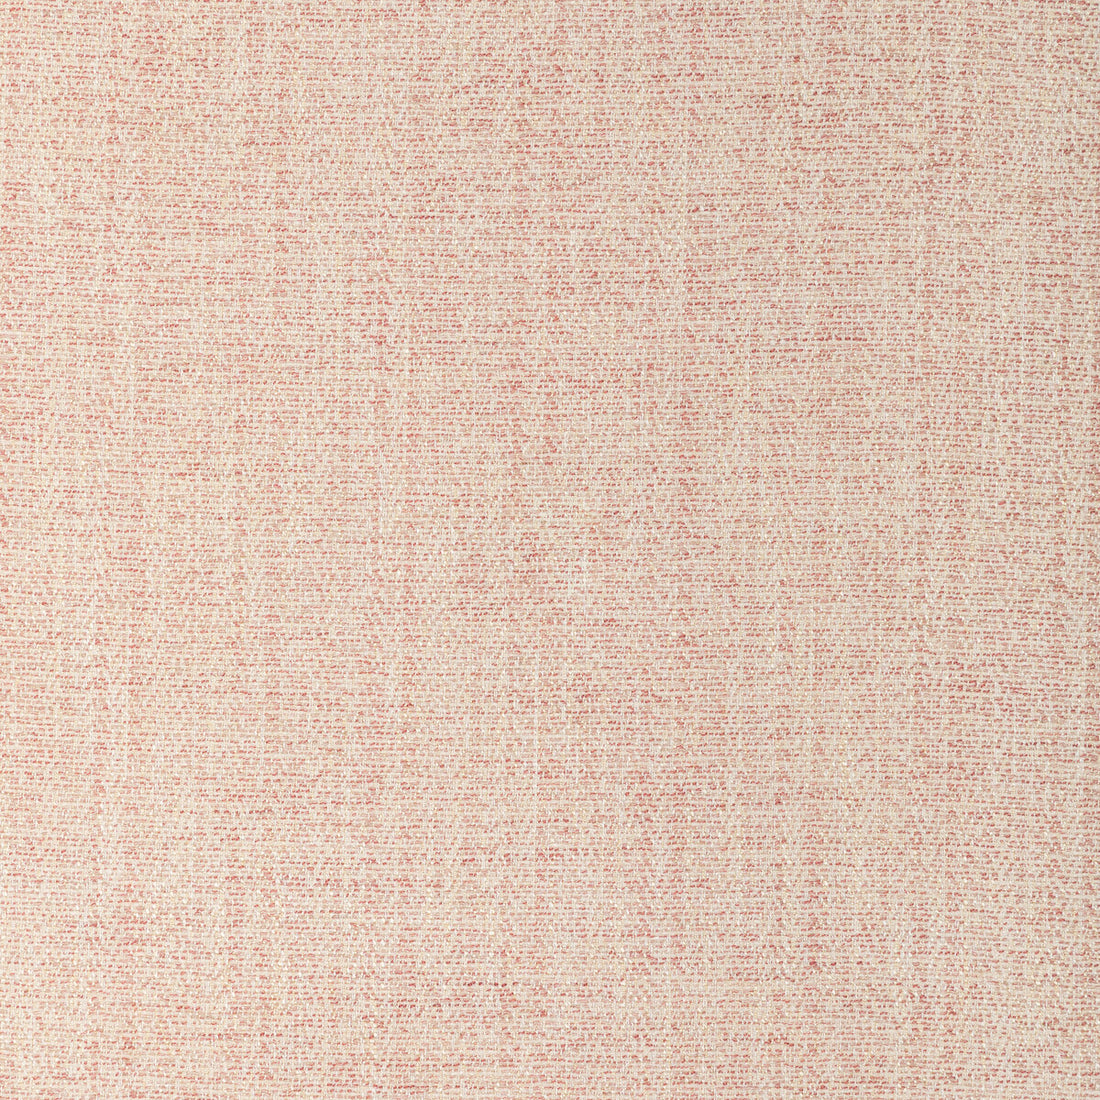 Alfaro Weave fabric in blush color - pattern 2021107.7.0 - by Lee Jofa in the Triana Weaves collection